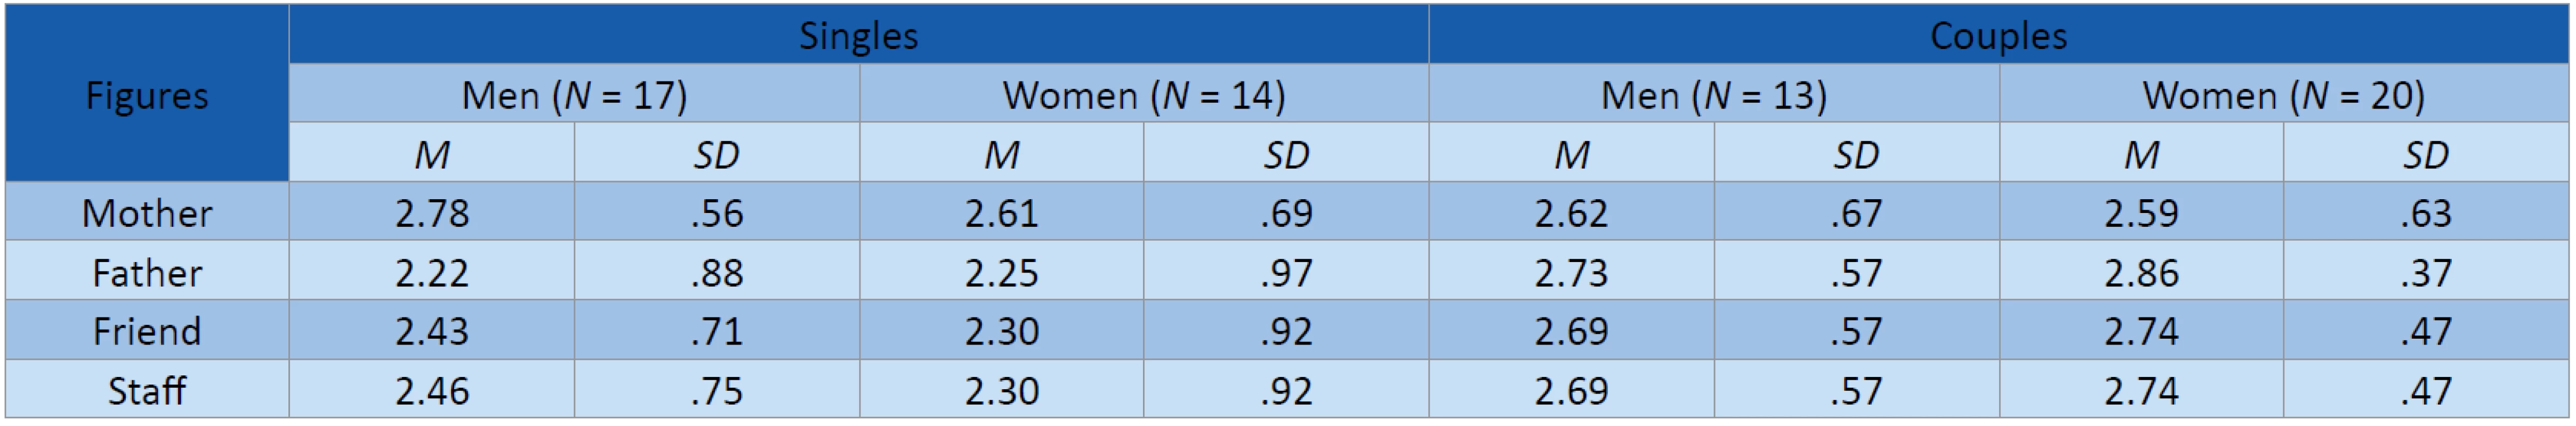 Social Networks Questionnaire: Means and SD according to Status and Gender (N = 64).